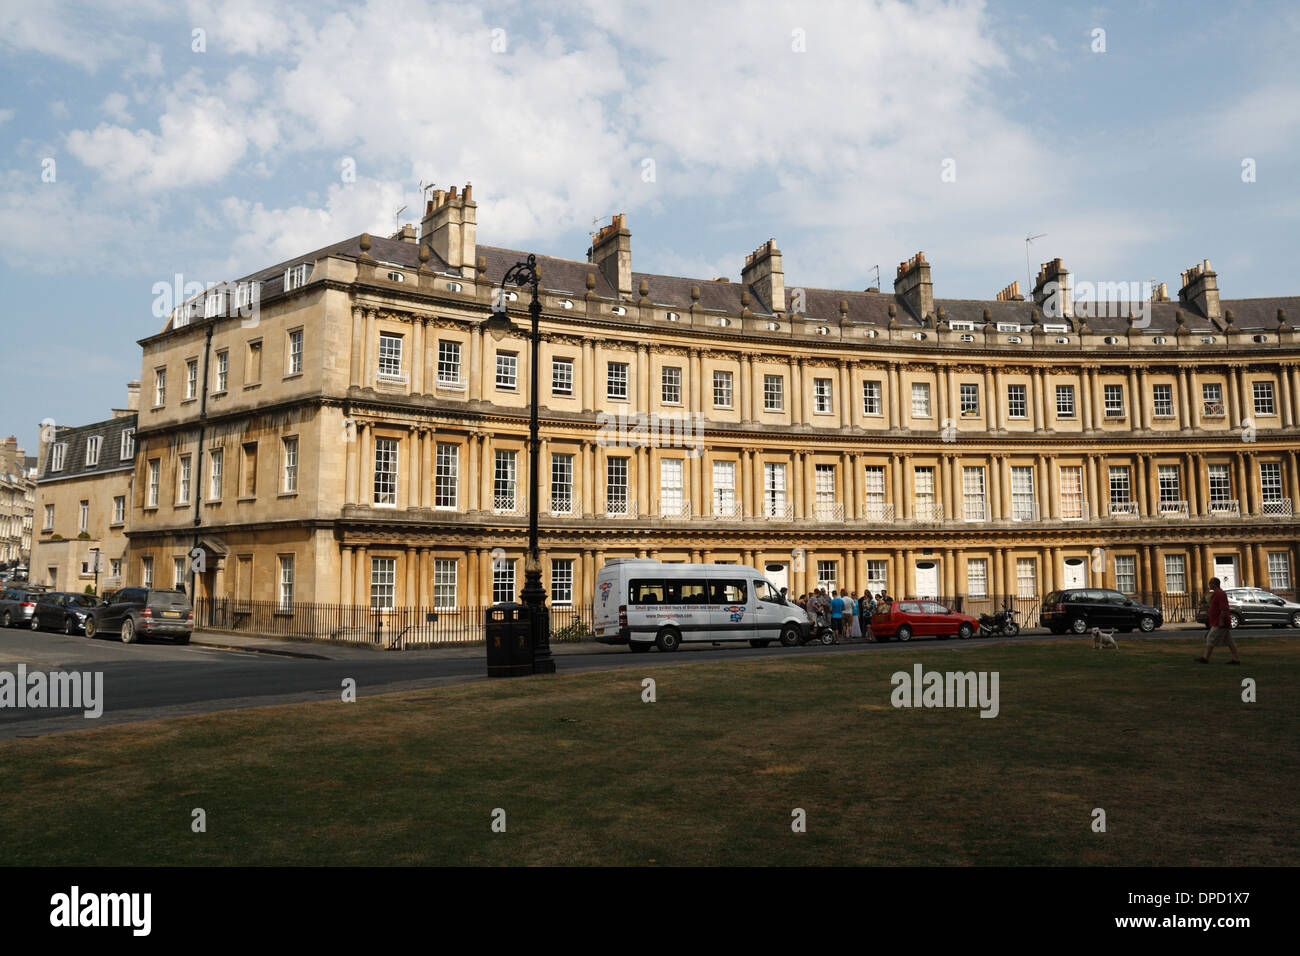 The Circus, Georgian Crescent Bath England UK, Period houses English townhouses heritage conservation area Stock Photo